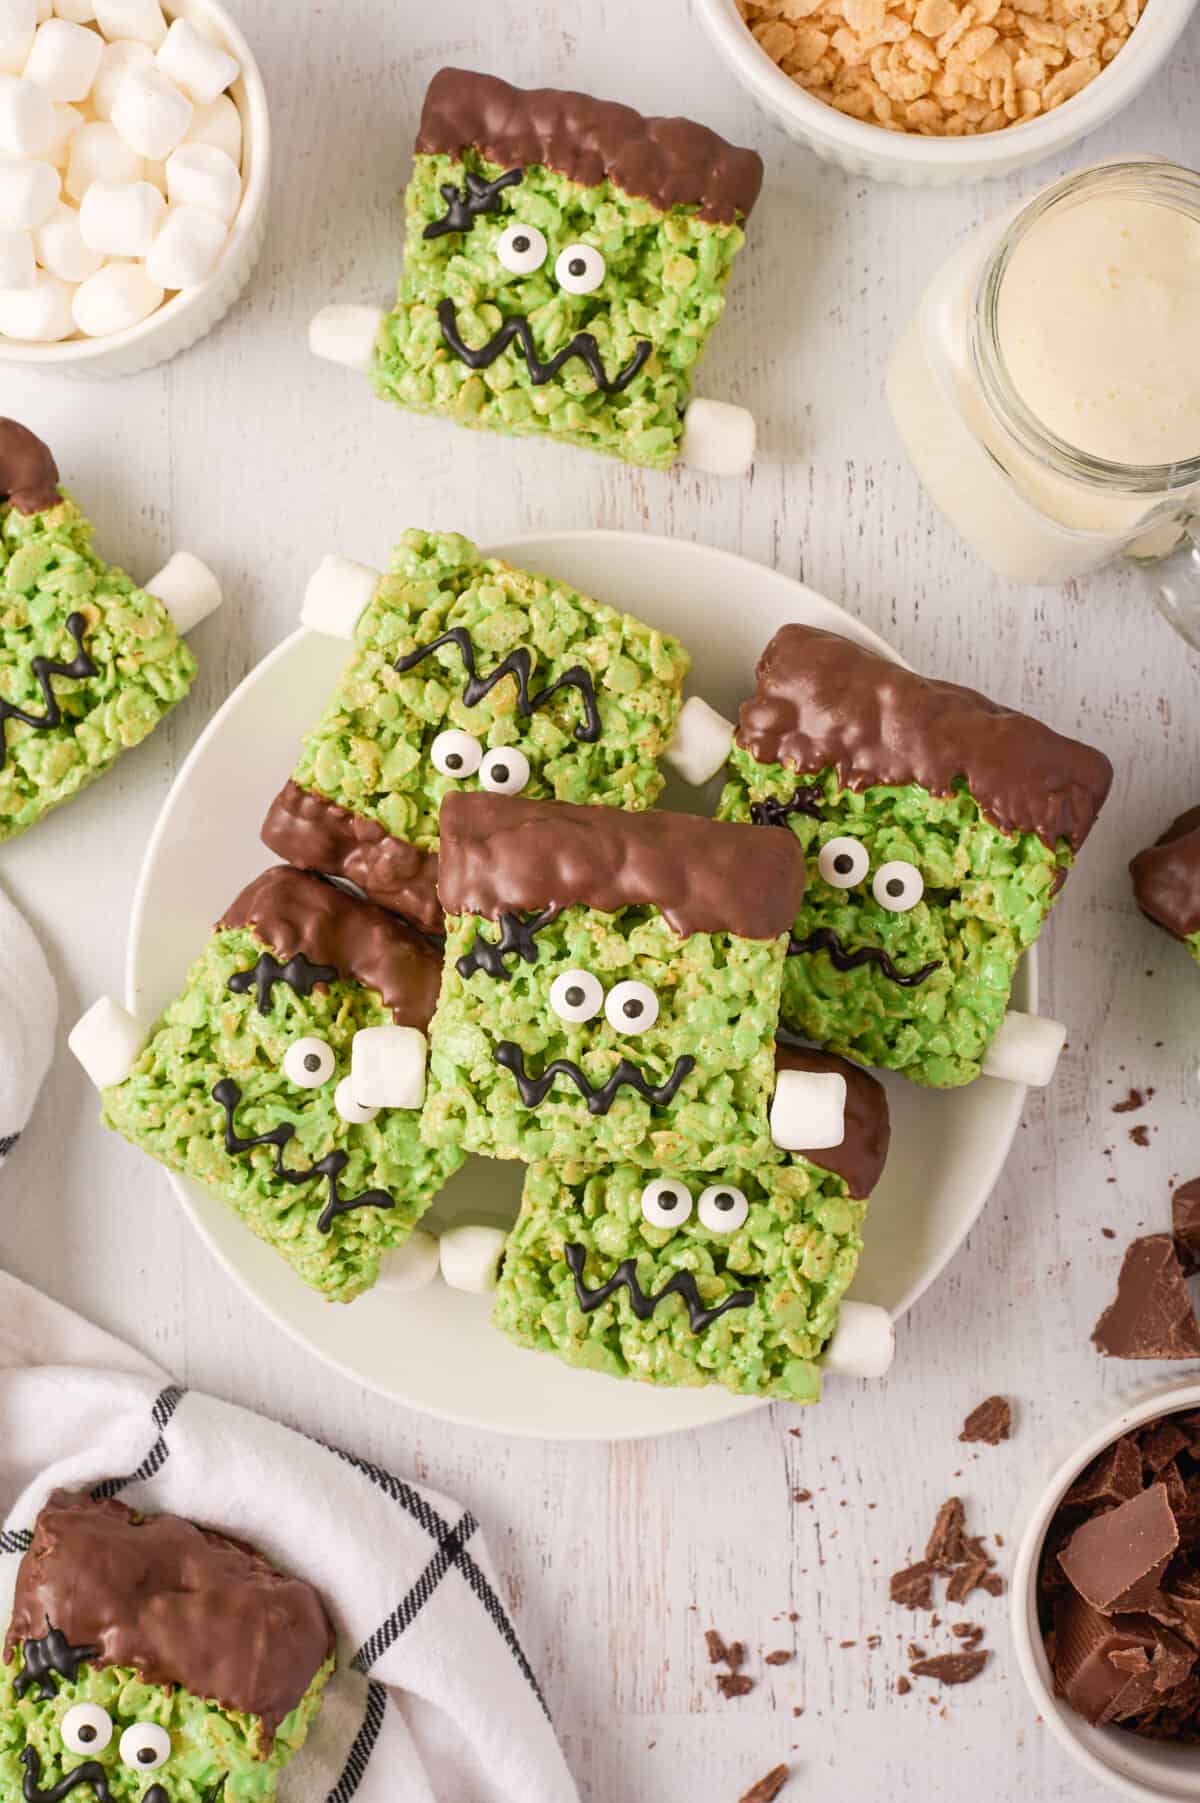 Frankenstein treats piled on white plate with mini marshmallows, chopped chocolate, and other ingredients around them.